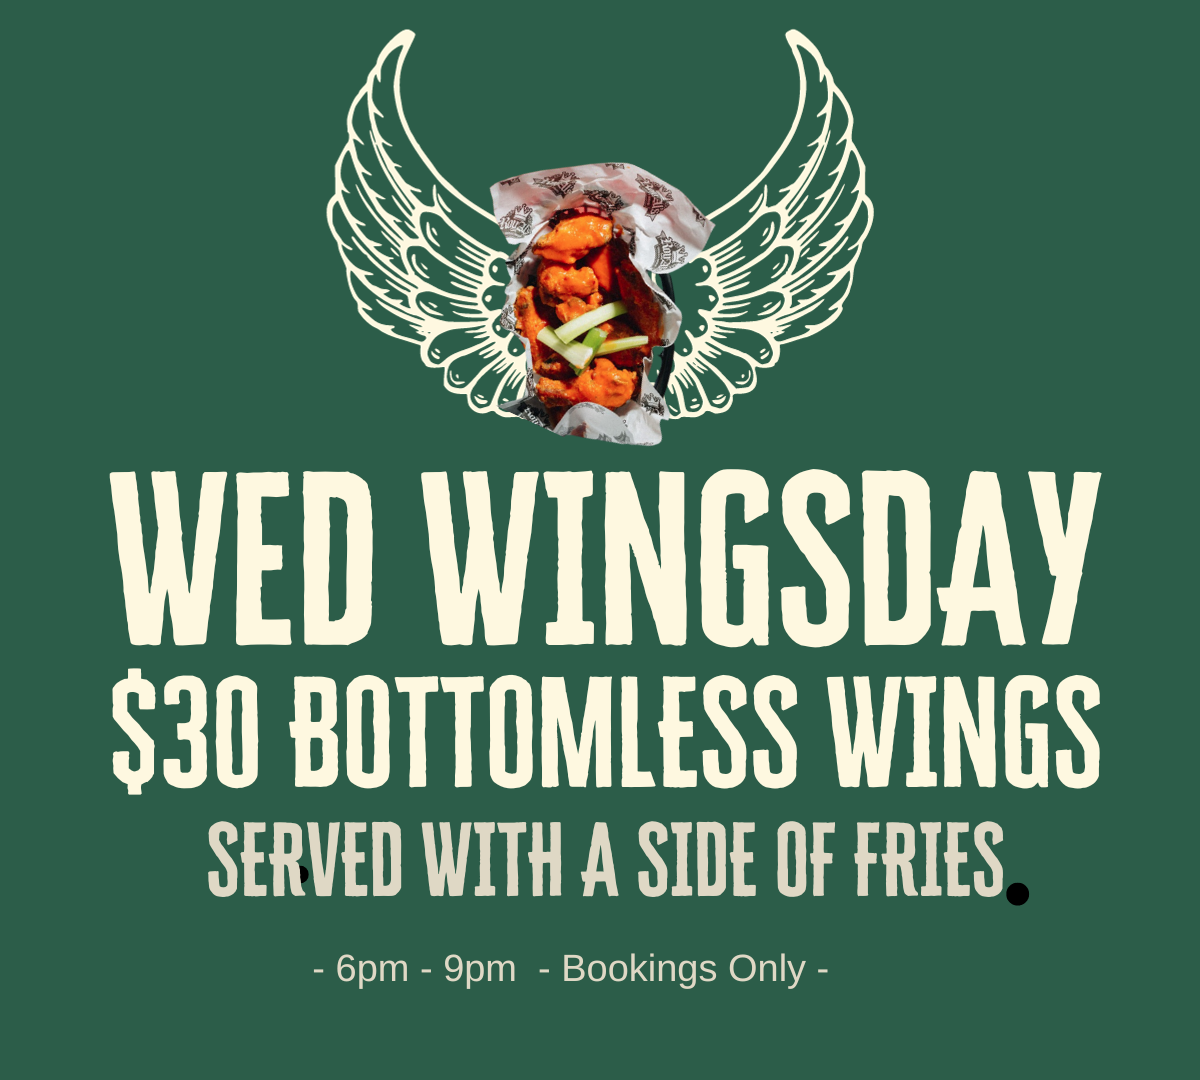 RoyAl's Chicken and Burger Specials: Wed Wingsday